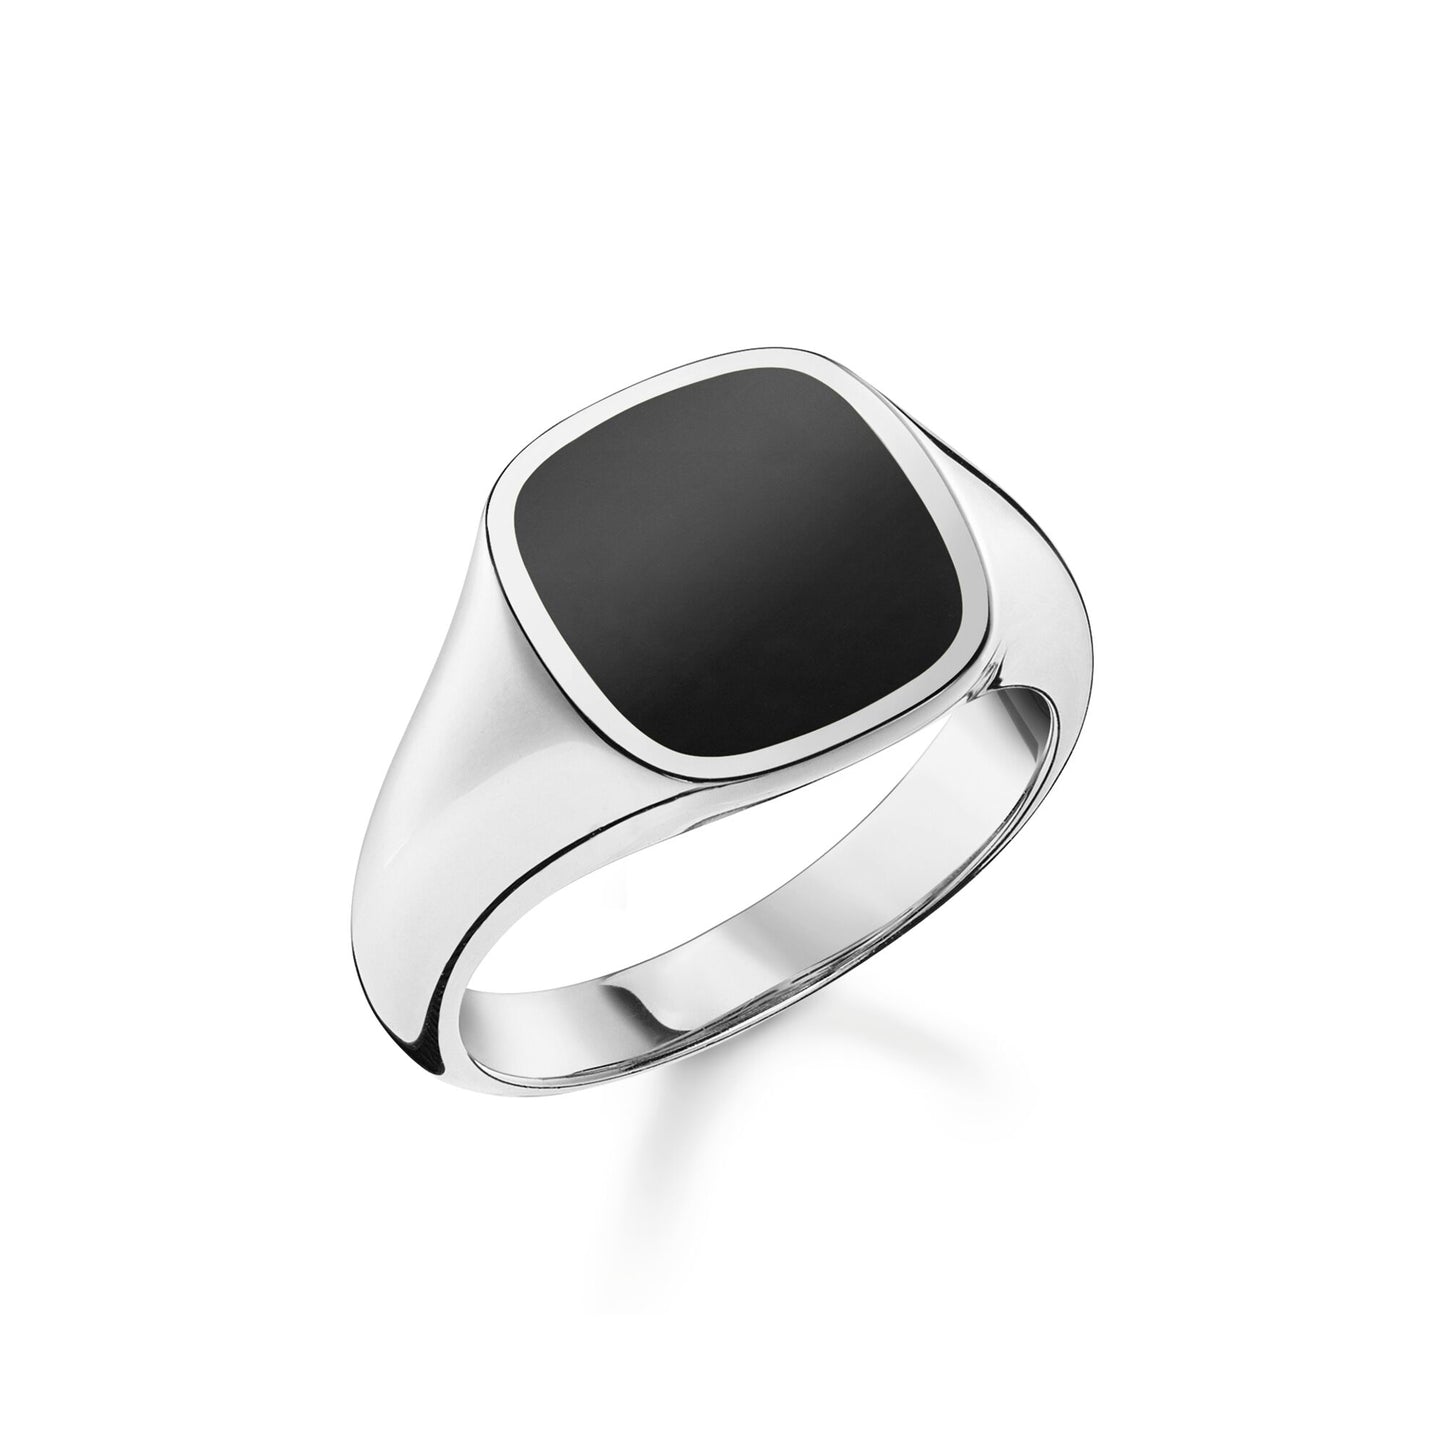 GENTS STERLING SILVER REBEL ONYX SQUARE SIGNET RING